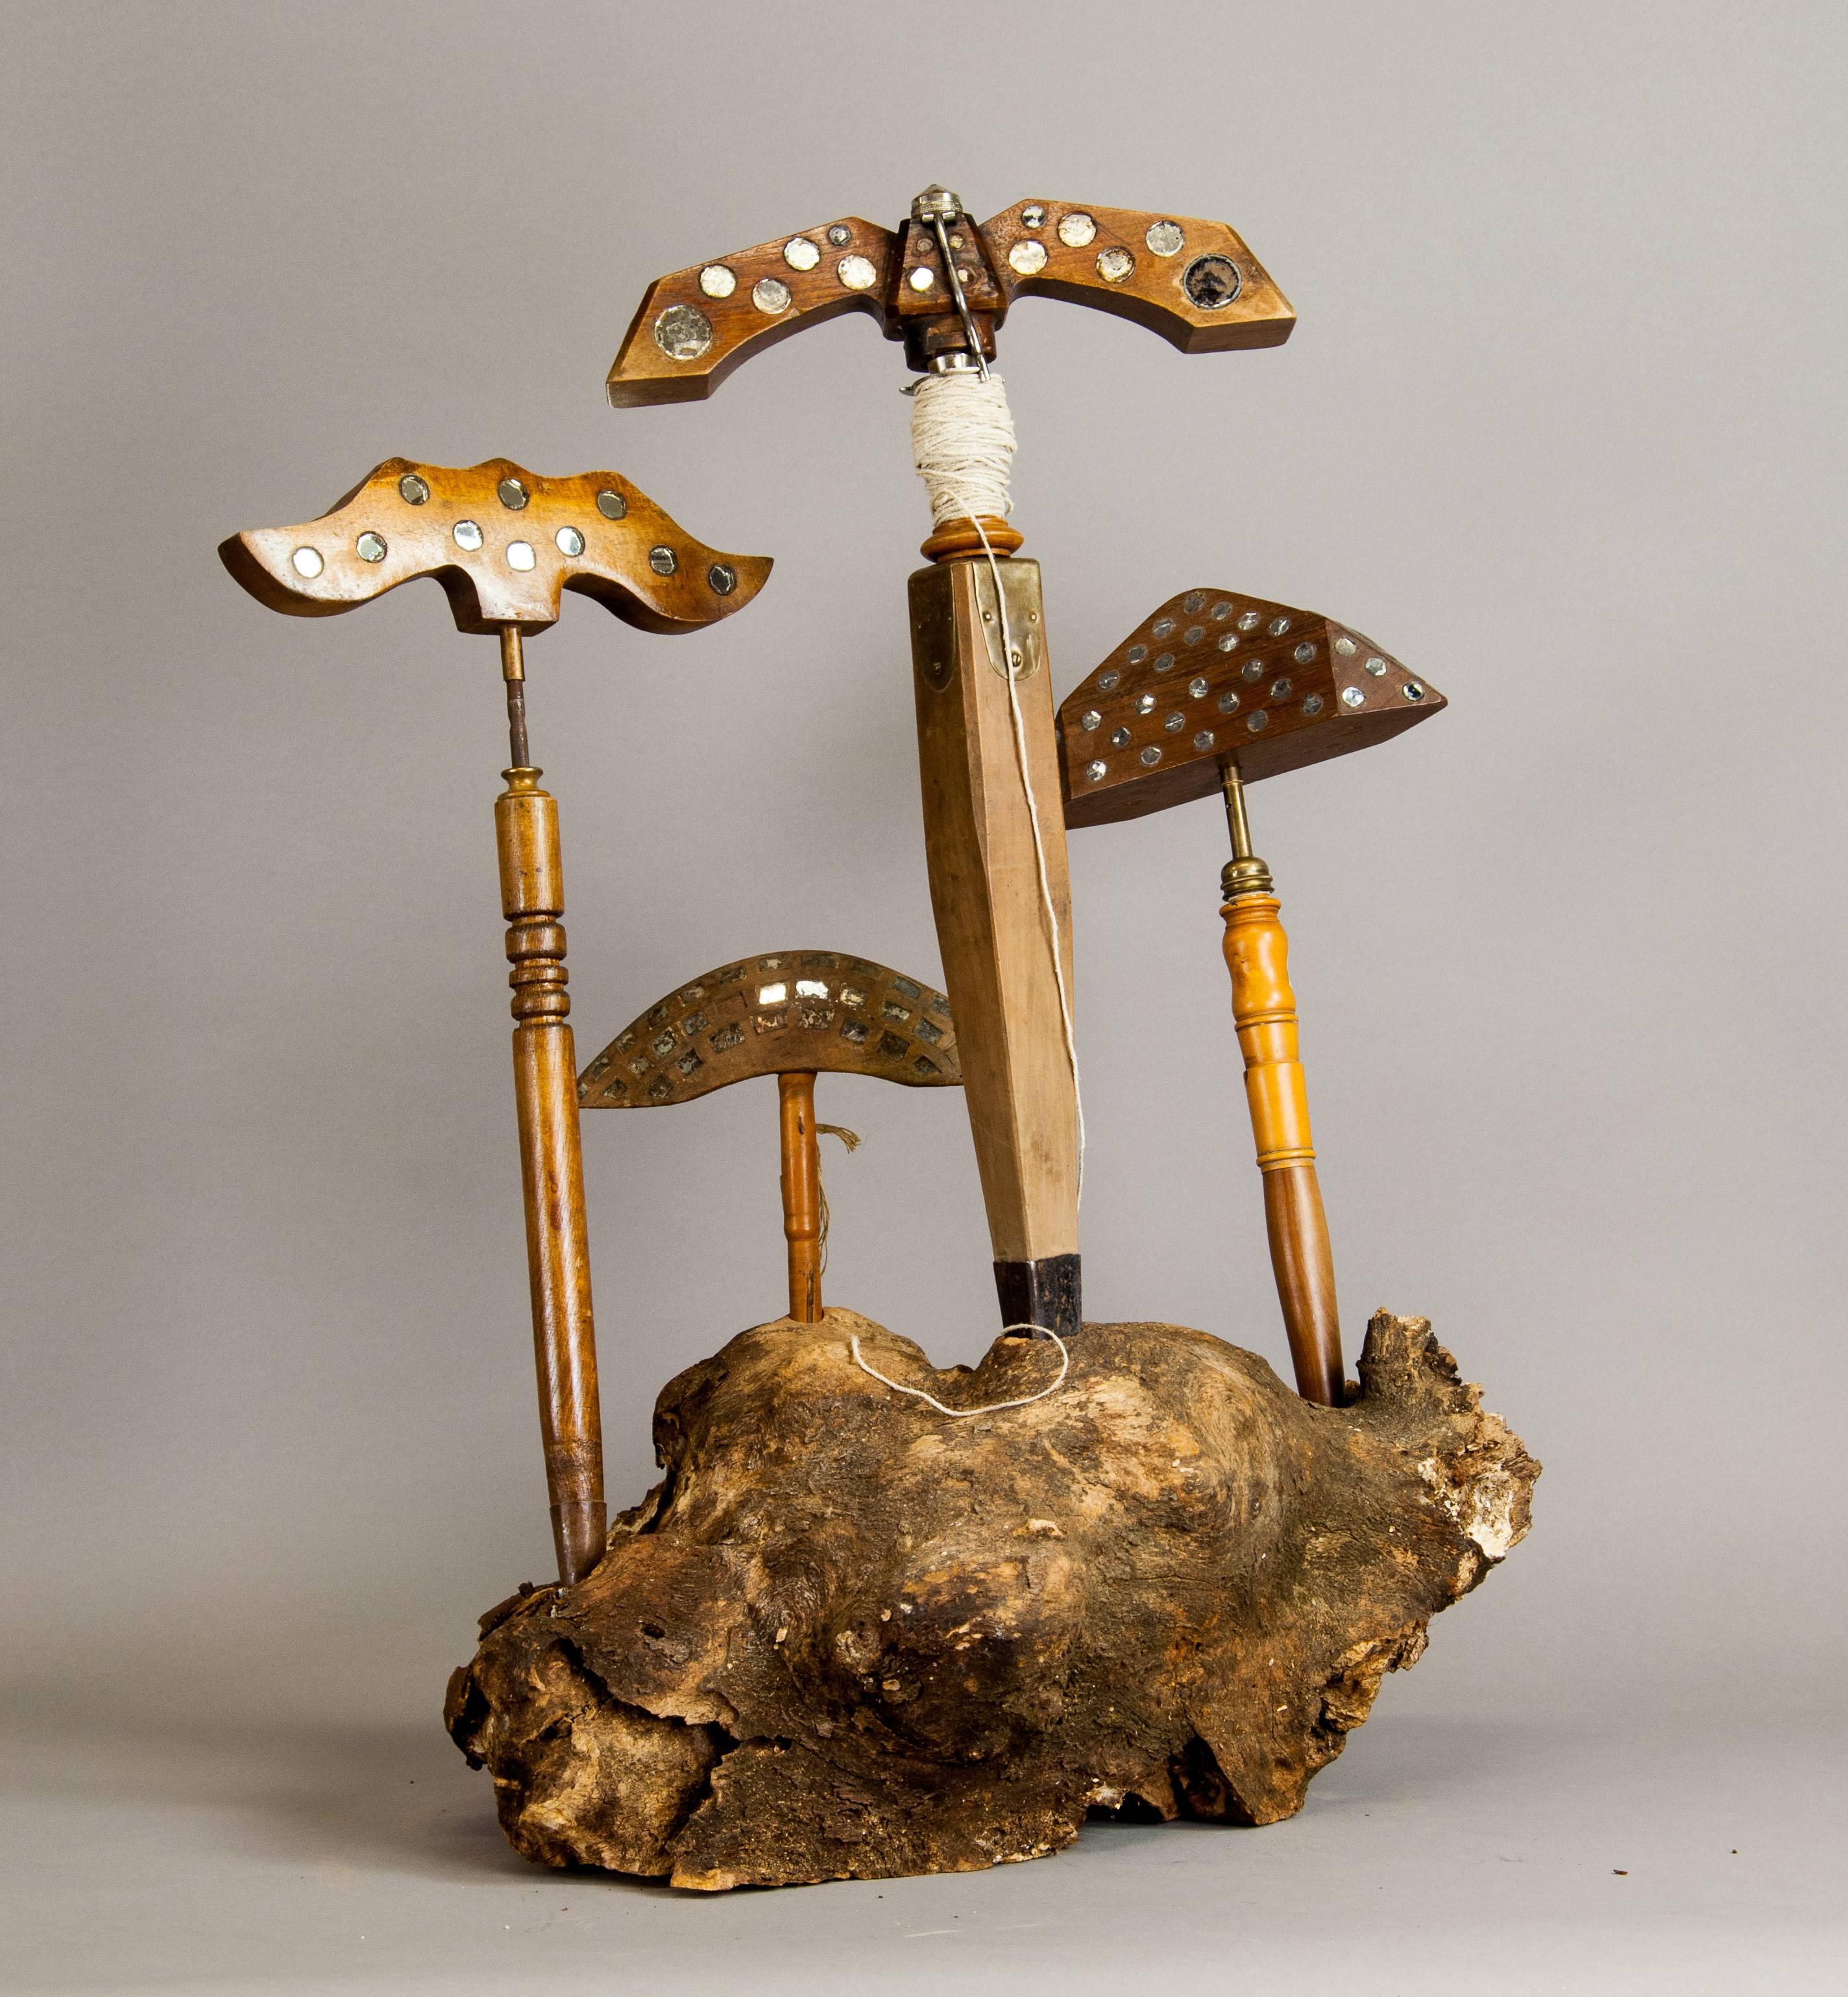 This is a set of four lark mirrors which have been used for fowling. Birds are frightened by turning the wooden piece on top of the tools. Displayed on a large piece of root wood.